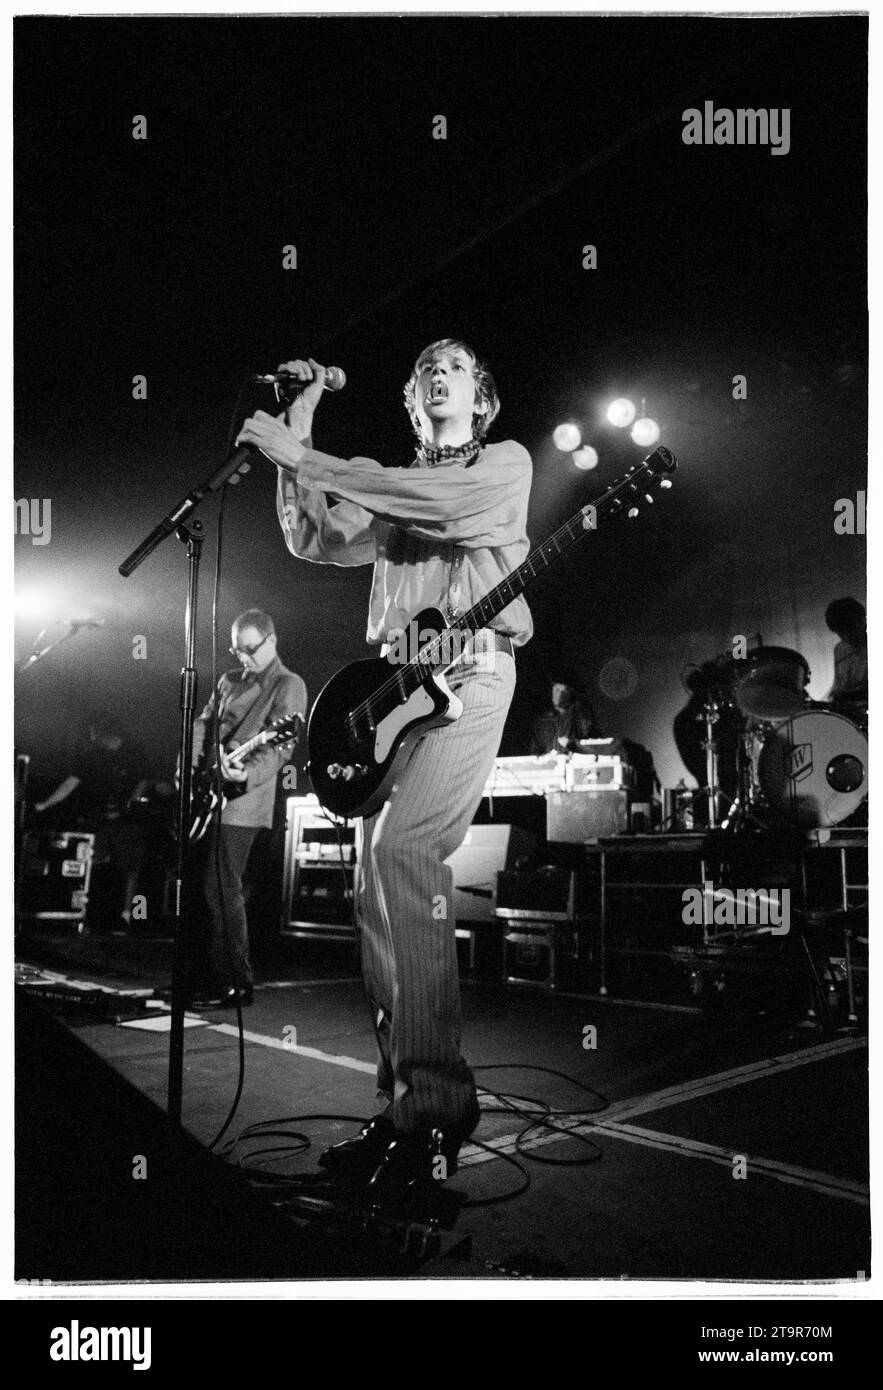 BECK, SINGER, 1997: Beck plays a one-off gig at Cardiff University to publicise the Odelay album on 3 March, 1997. The star only played two dates in the UK on this visit. The concert featured an incredible extended guitar battle with Beck on guitar and a champion scratch DJ manipulating a guitar chord on the decks. Photo: Rob Watkins Stock Photo